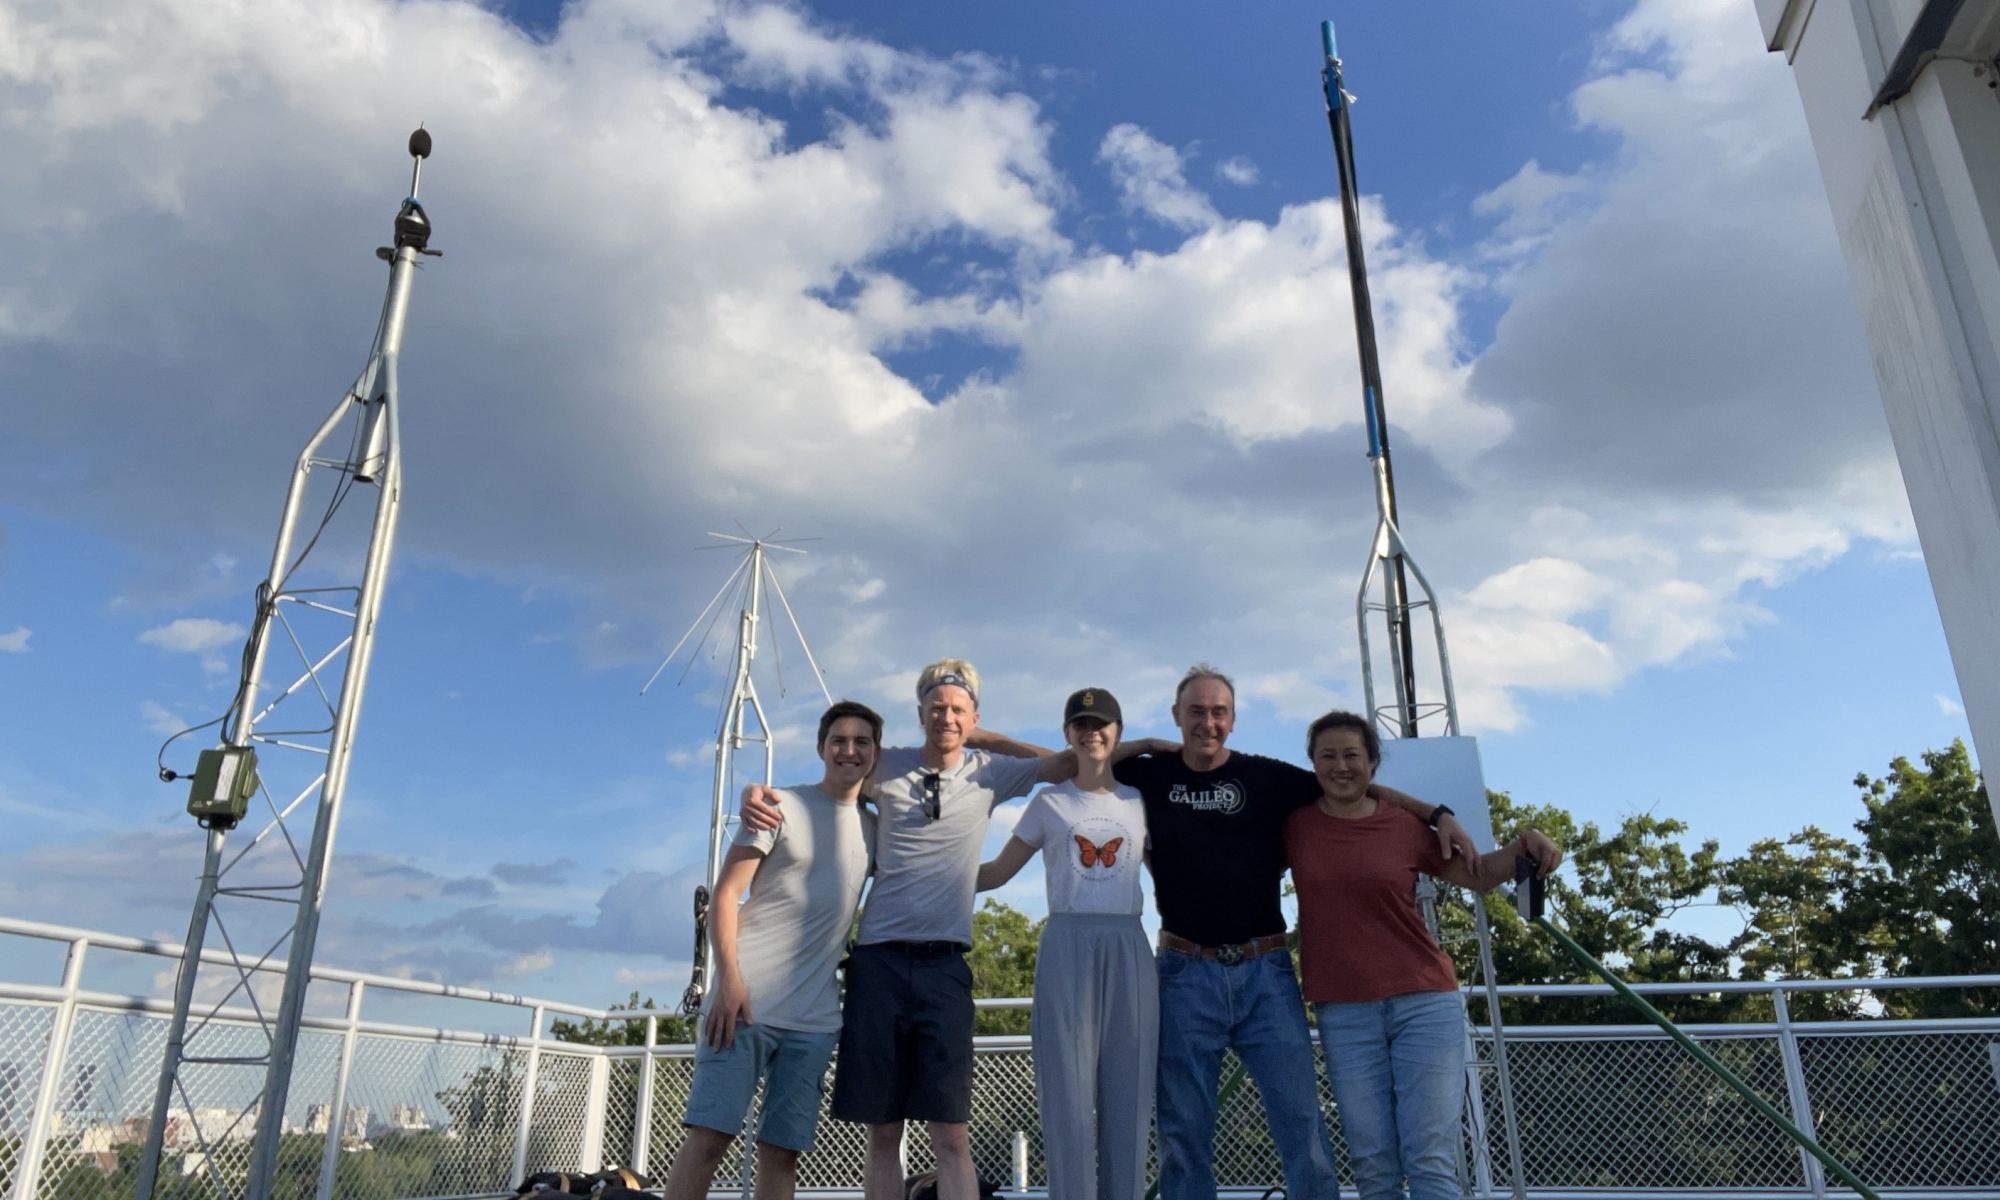 Galileo Project members (from left: Carson Ezell, Ezra Kelderman, Abby White, Alex and Lily Delacroix) with the audio tower (left), radar spectrum tower (middle) and radar imaging tower (right) behind them on the roof of the Harvard College Observatory.